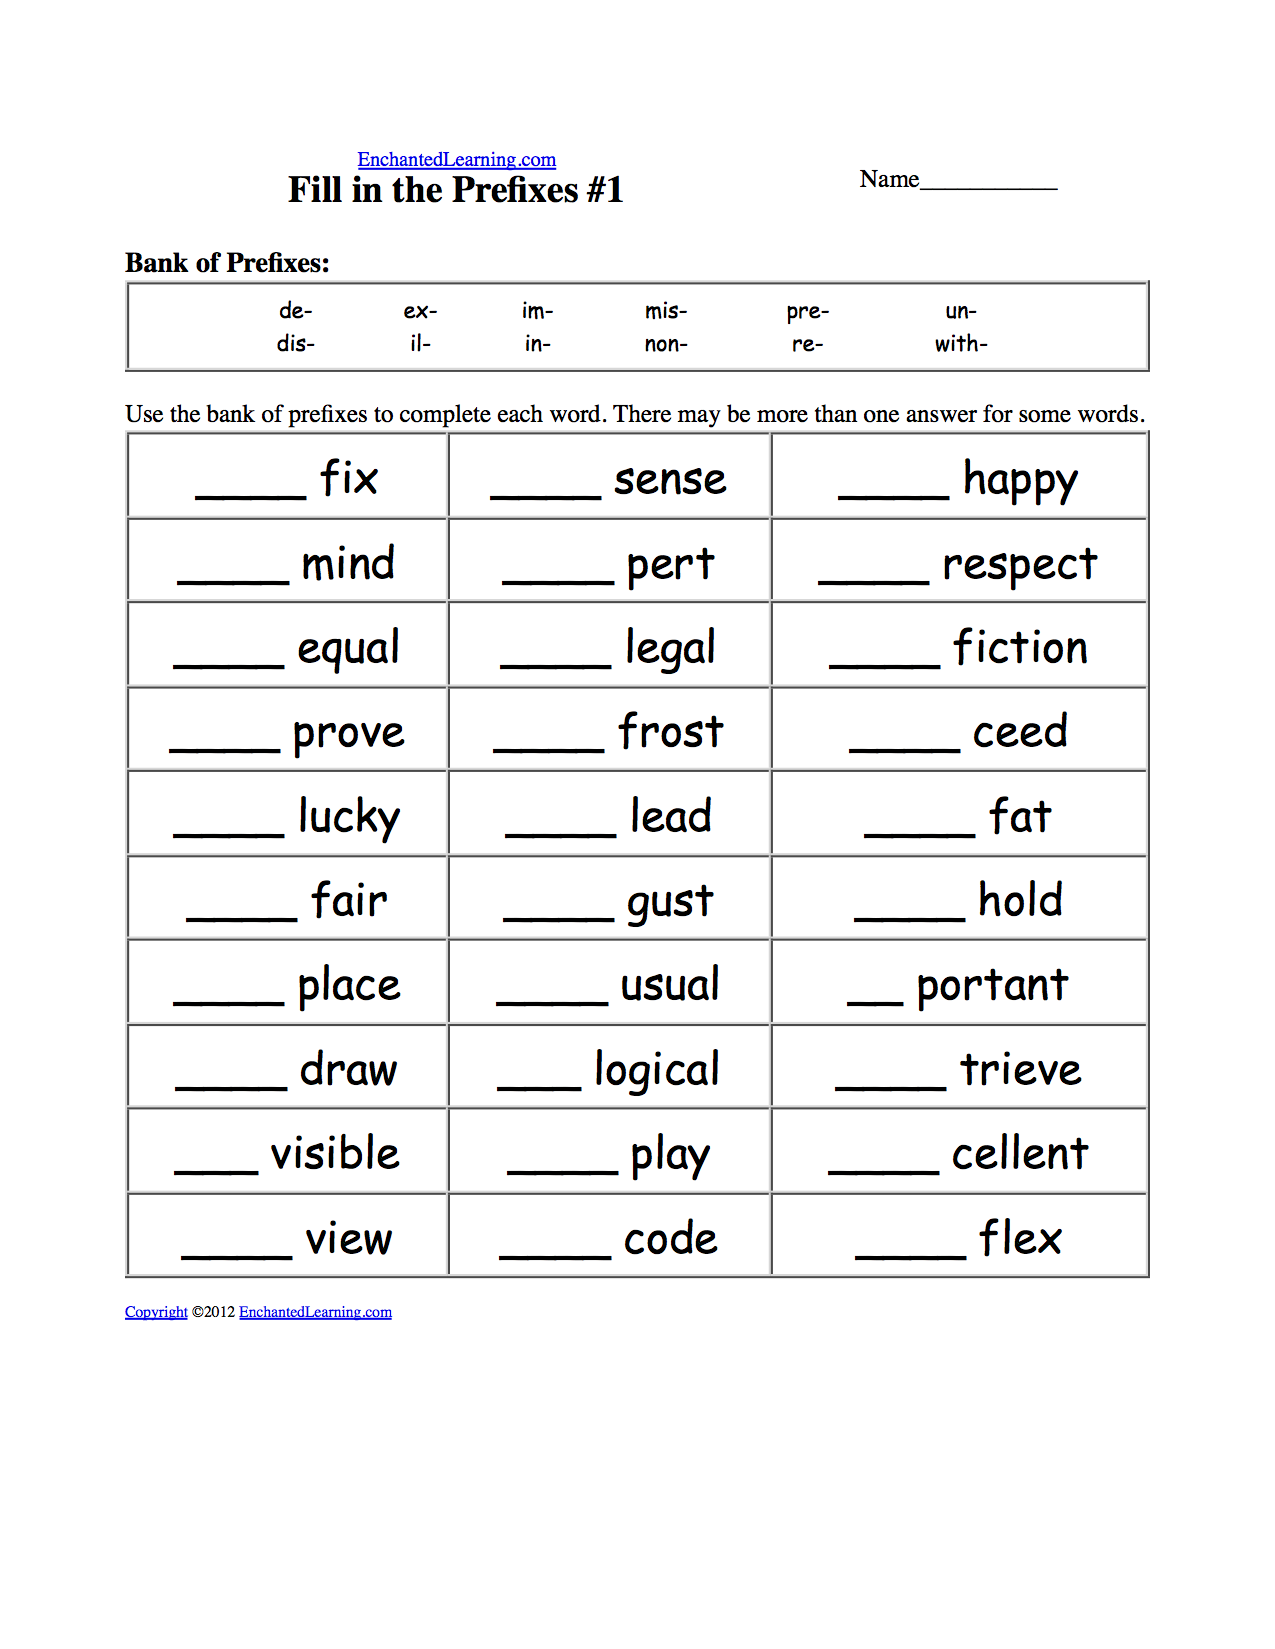 Fill in the Prefixes: Worksheets. EnchantedLearning.com For Prefixes And Suffixes Worksheet